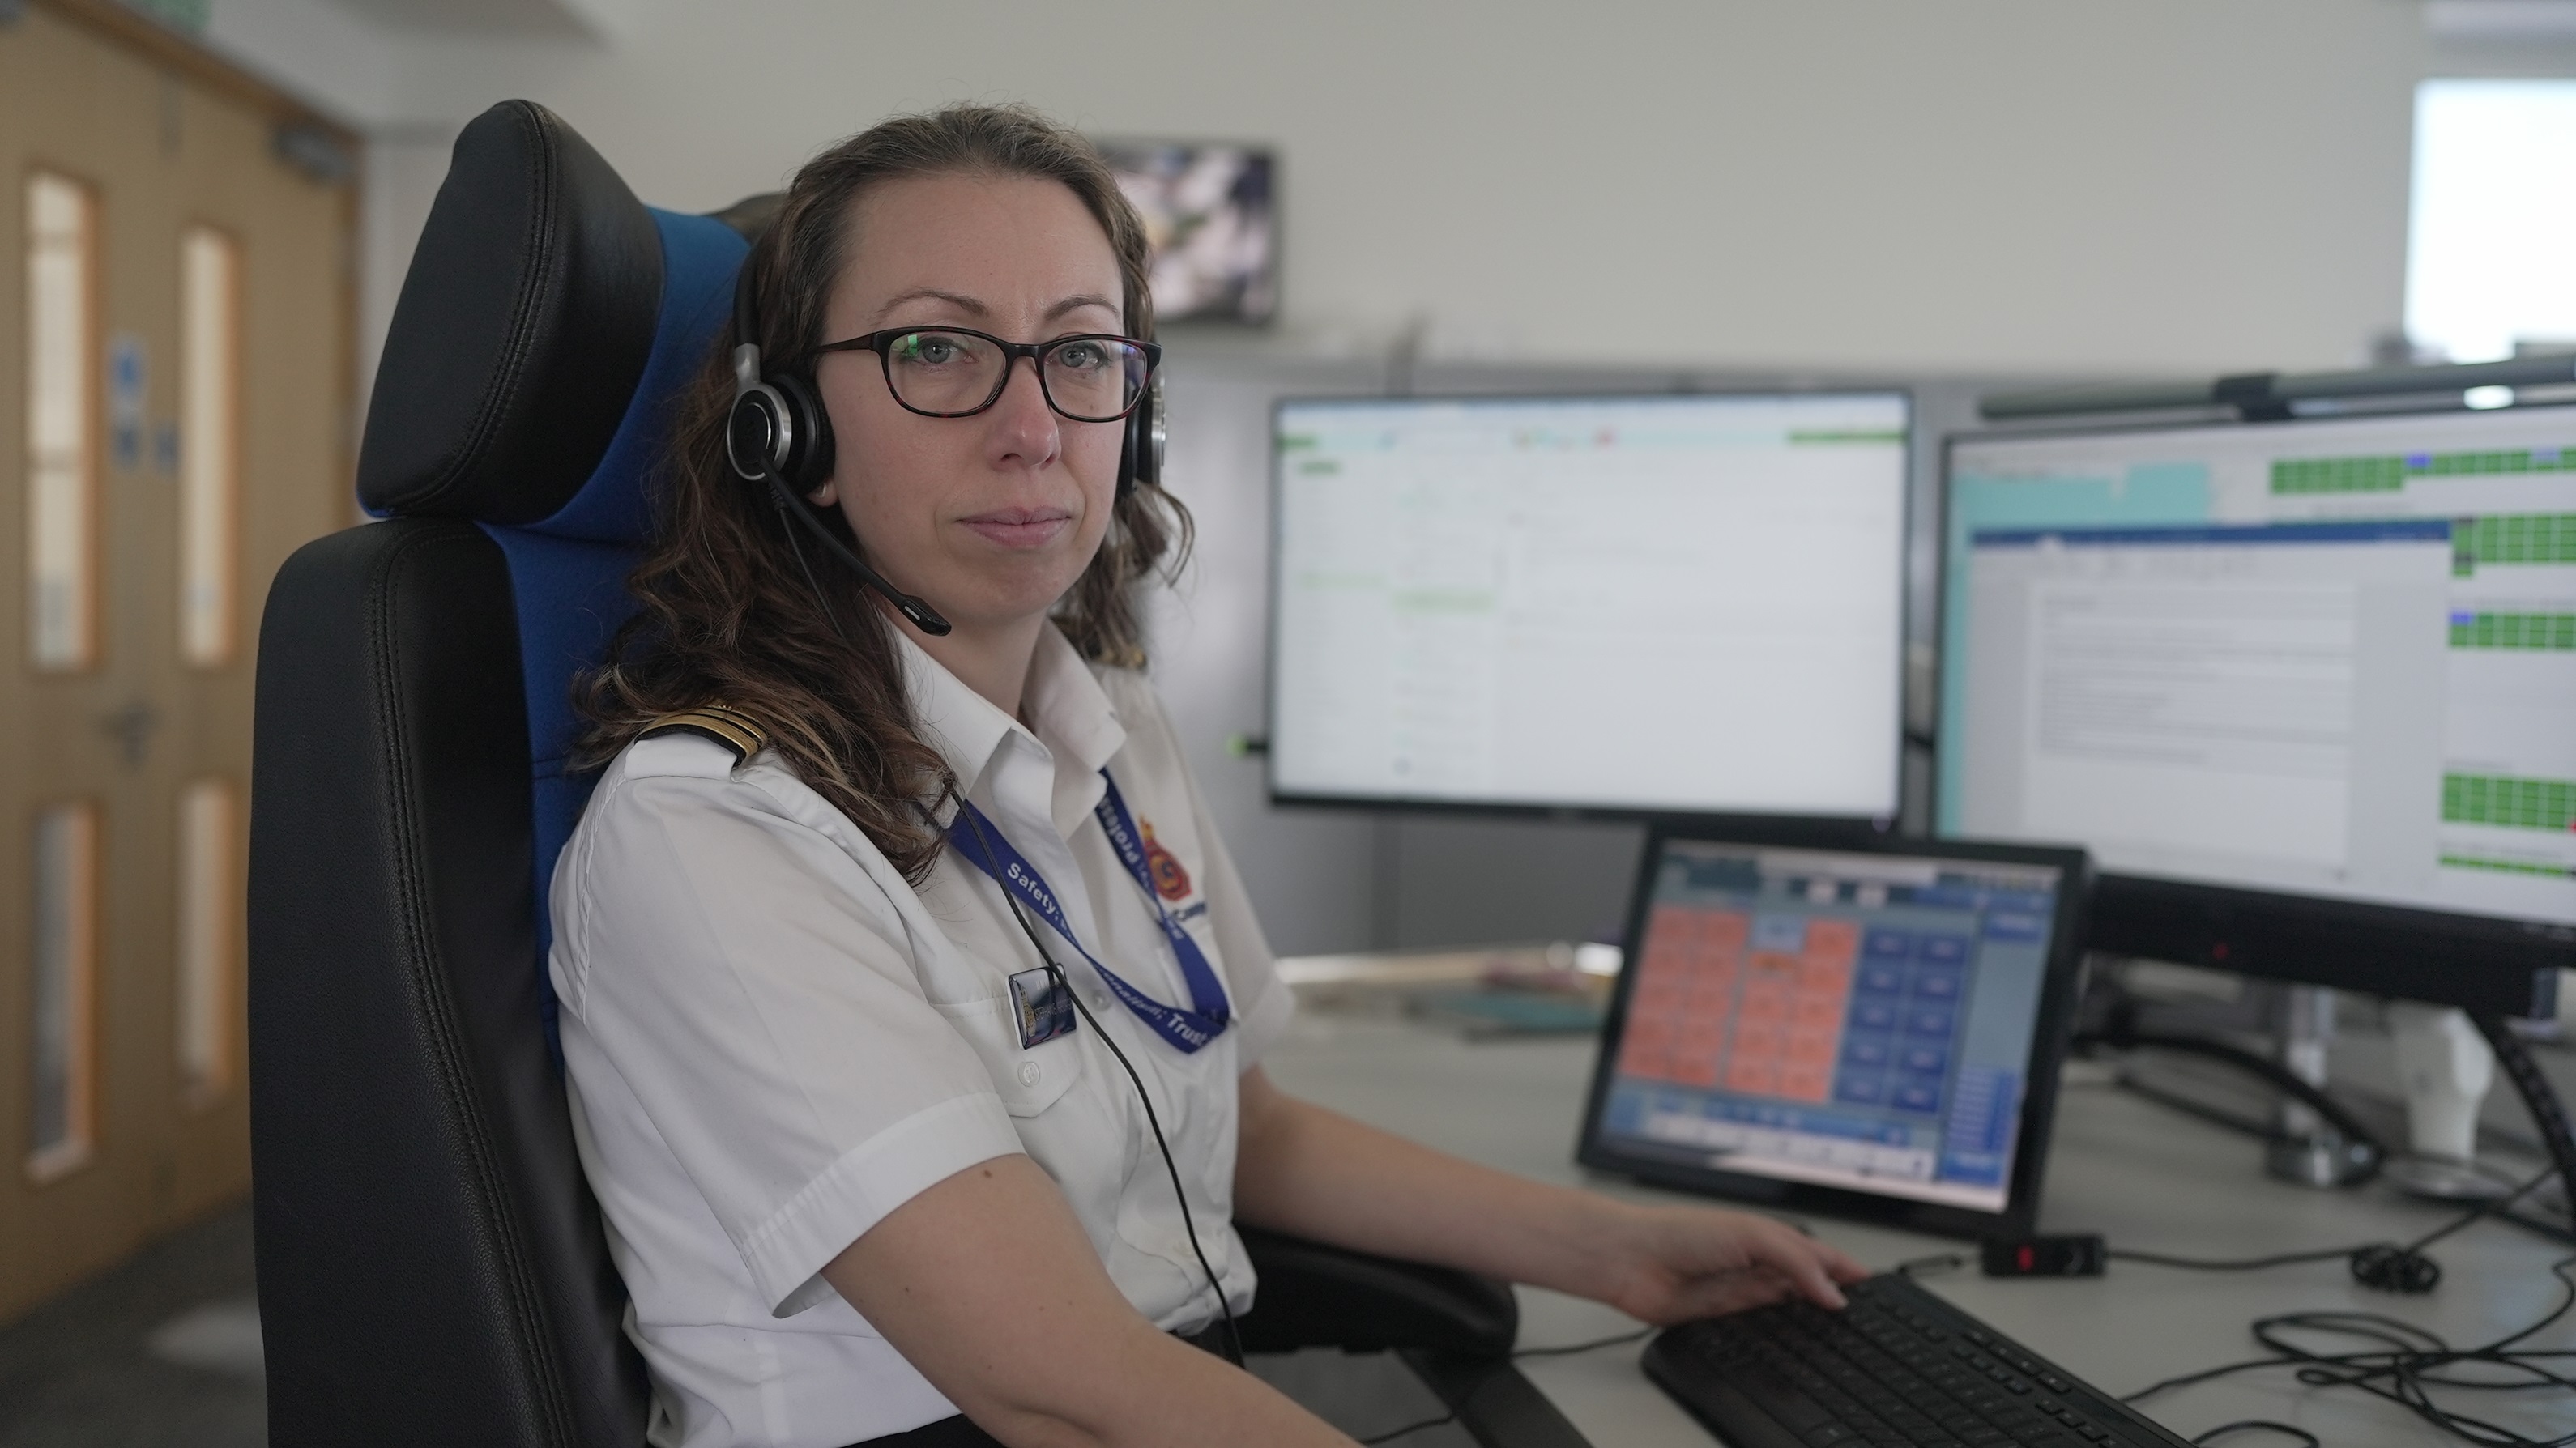 Stephanie George, Team Leader at Holyhead Maritime Rescue Coordination Centre, sits at a desk with computer screens